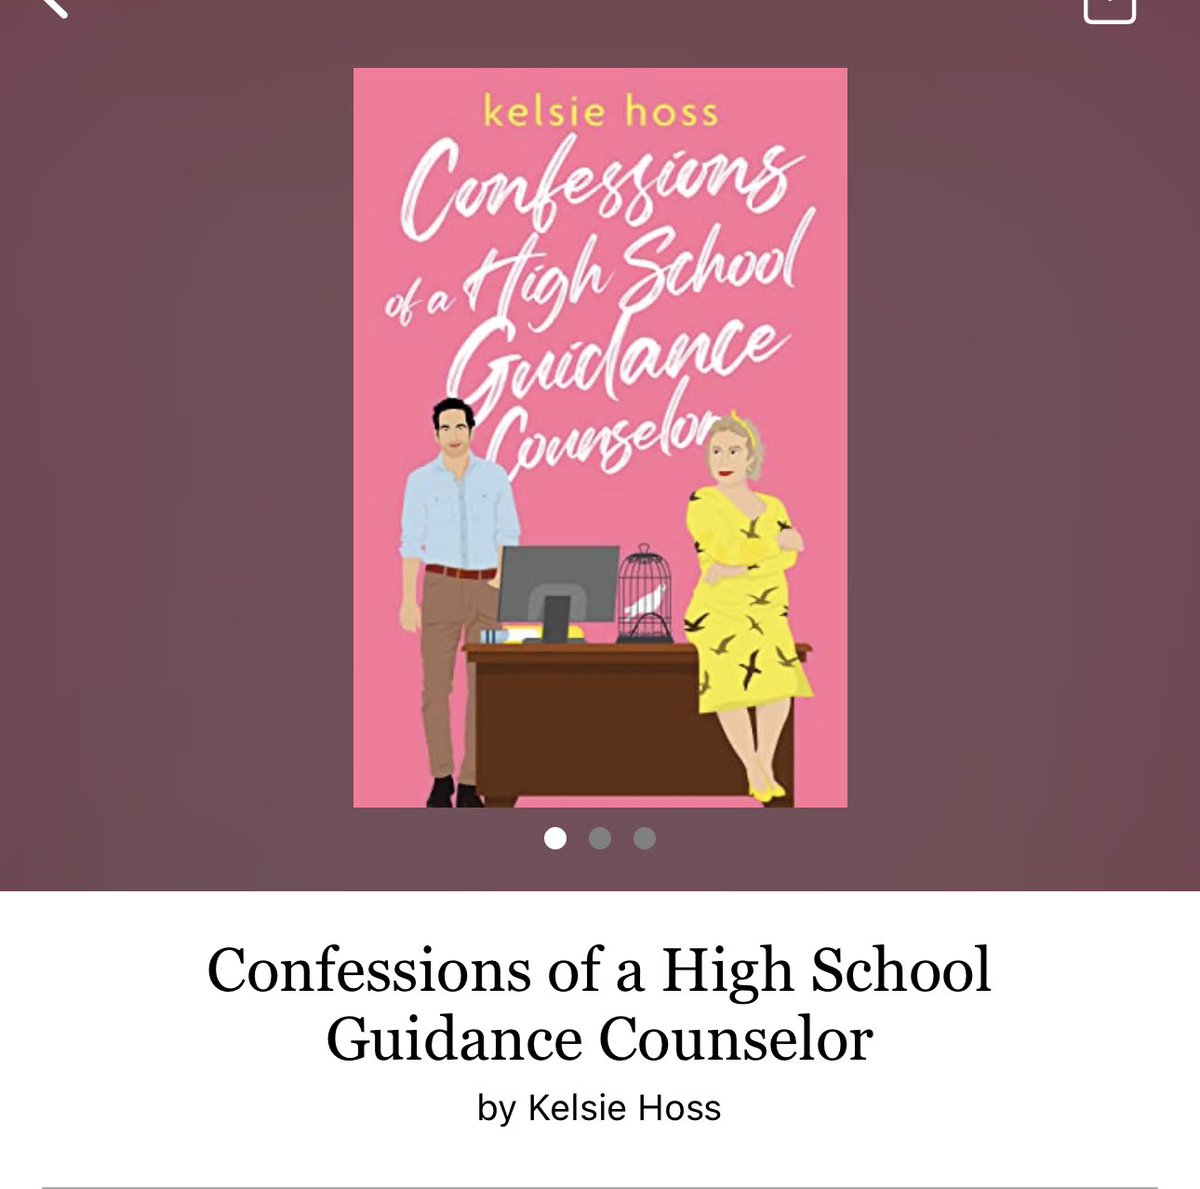 Confessions of a High School Guidance Counselor by Kelsie Hoss 

#ConfessionsOfAHighSchoolGuidanceCounselor by #KelsieHoss #5014 #78chapters #357pages #557of400 #9hourAudiobook #Audiobook #19for5 #HCPL #June2023 #clearingoffreadingshelves #whatsnext #readiitquick